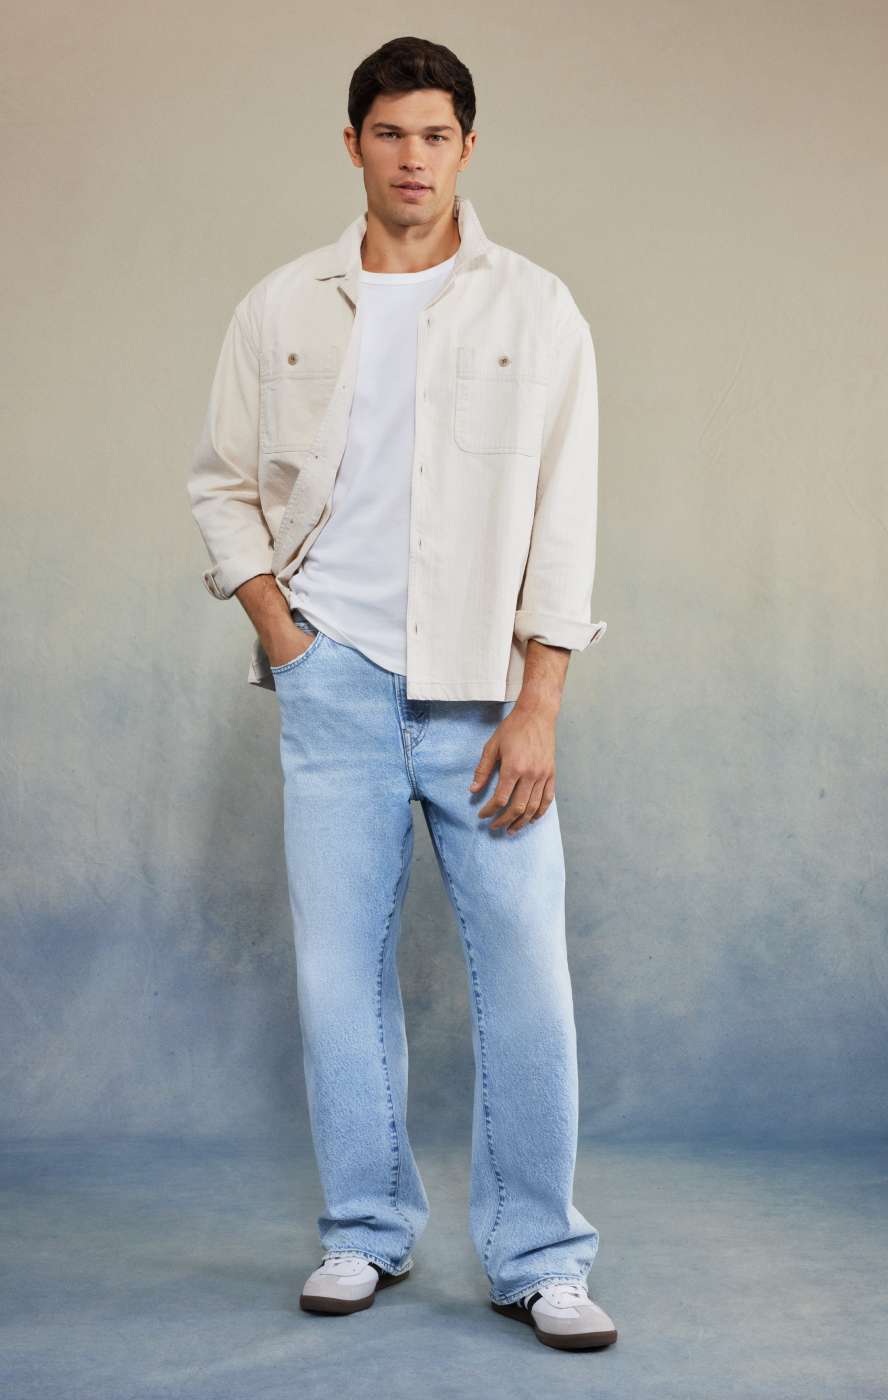 How to Wear White Jeans - Men's Style Guide  Jeans outfit men, White jeans  men, Mens fashion jeans